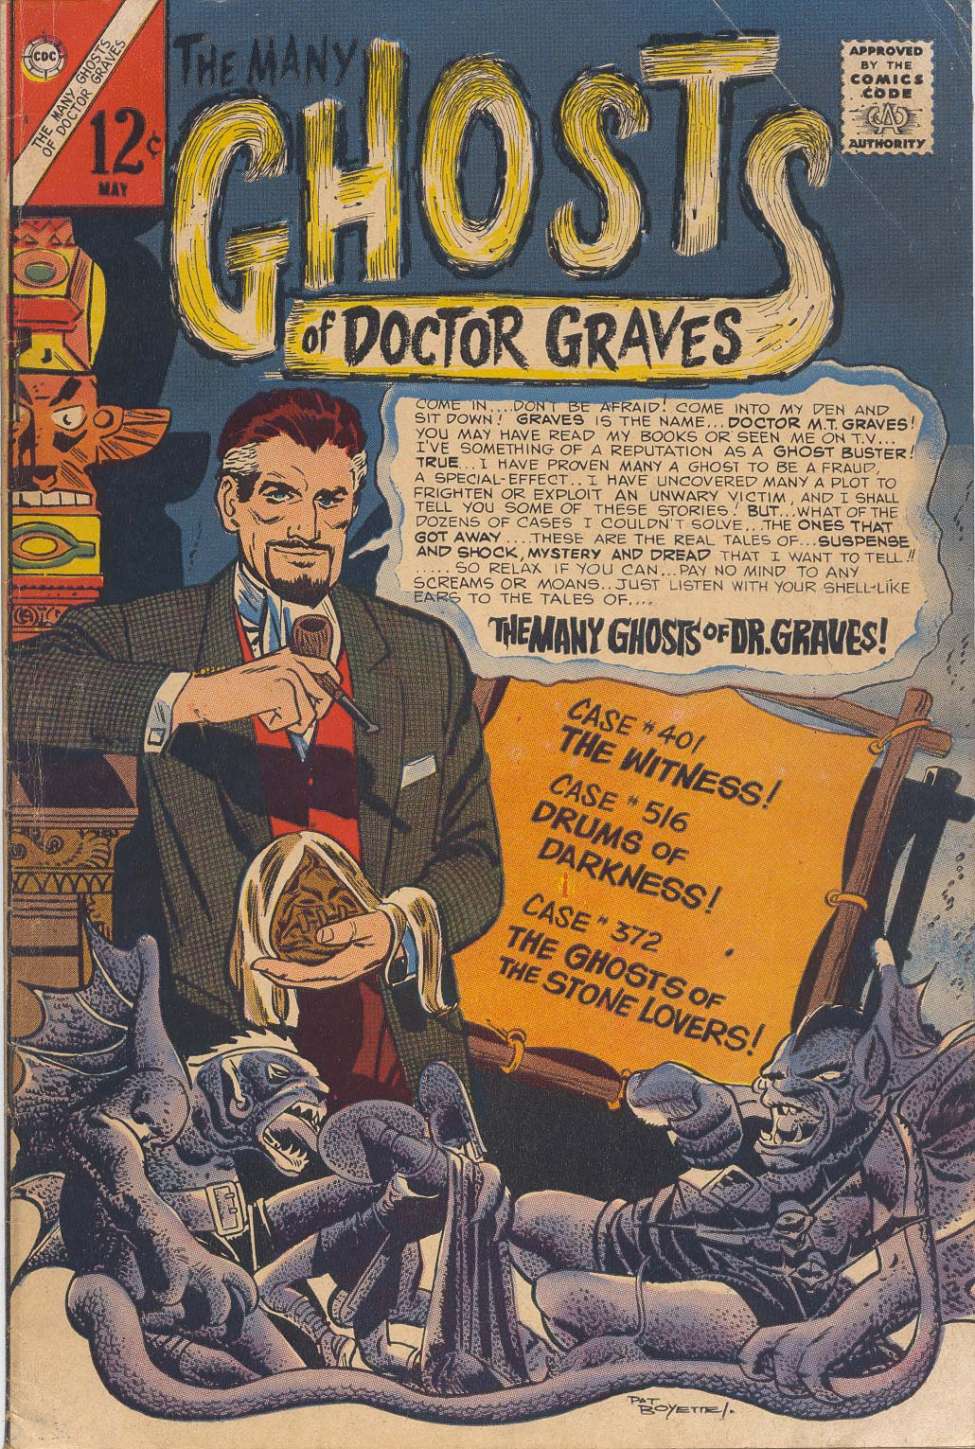 Comic Book Cover For The Many Ghosts of Doctor Graves 1